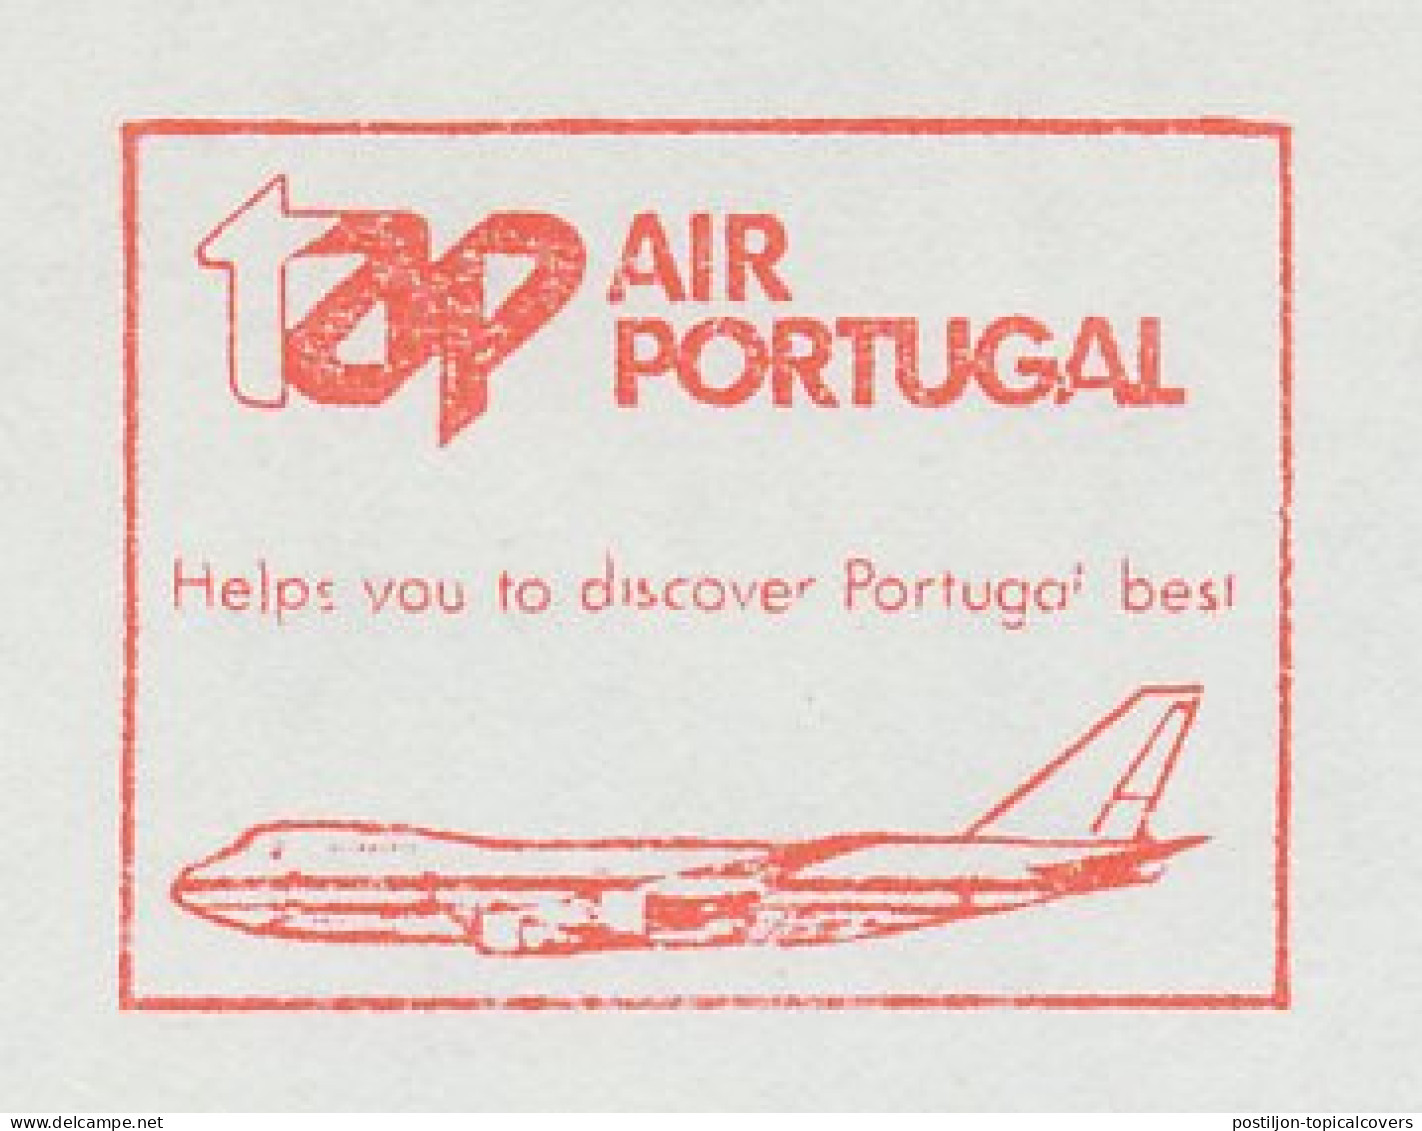 Meter Cut Netherlands 1983 Air Portugal - Airplane - Flugzeuge